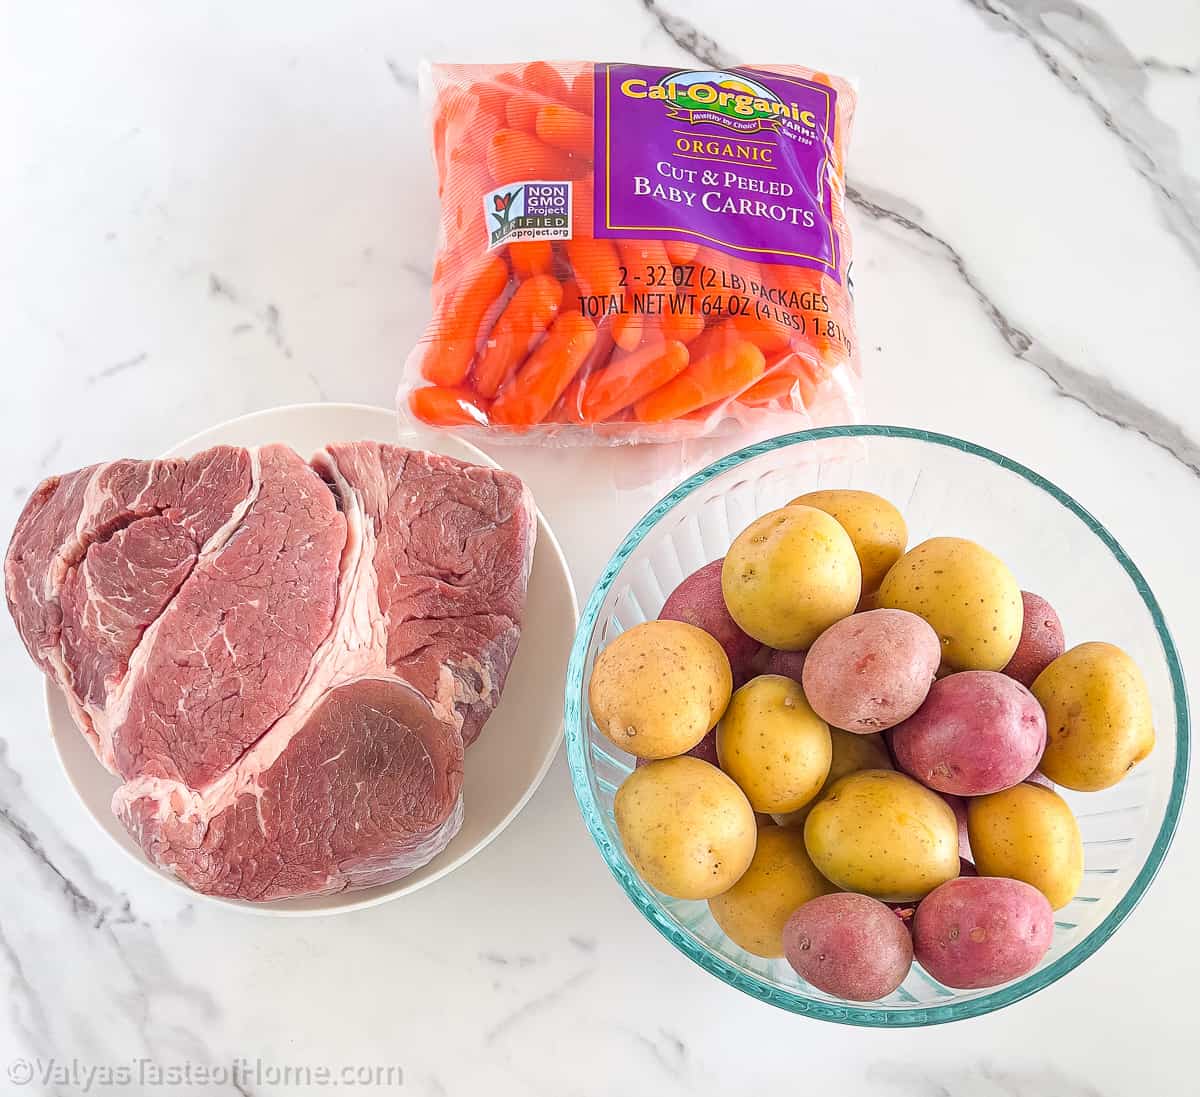 A beef chuck roast is a great cut of beef for slow cooking as it becomes fall-apart tender and absorbs the flavors of the other ingredients.